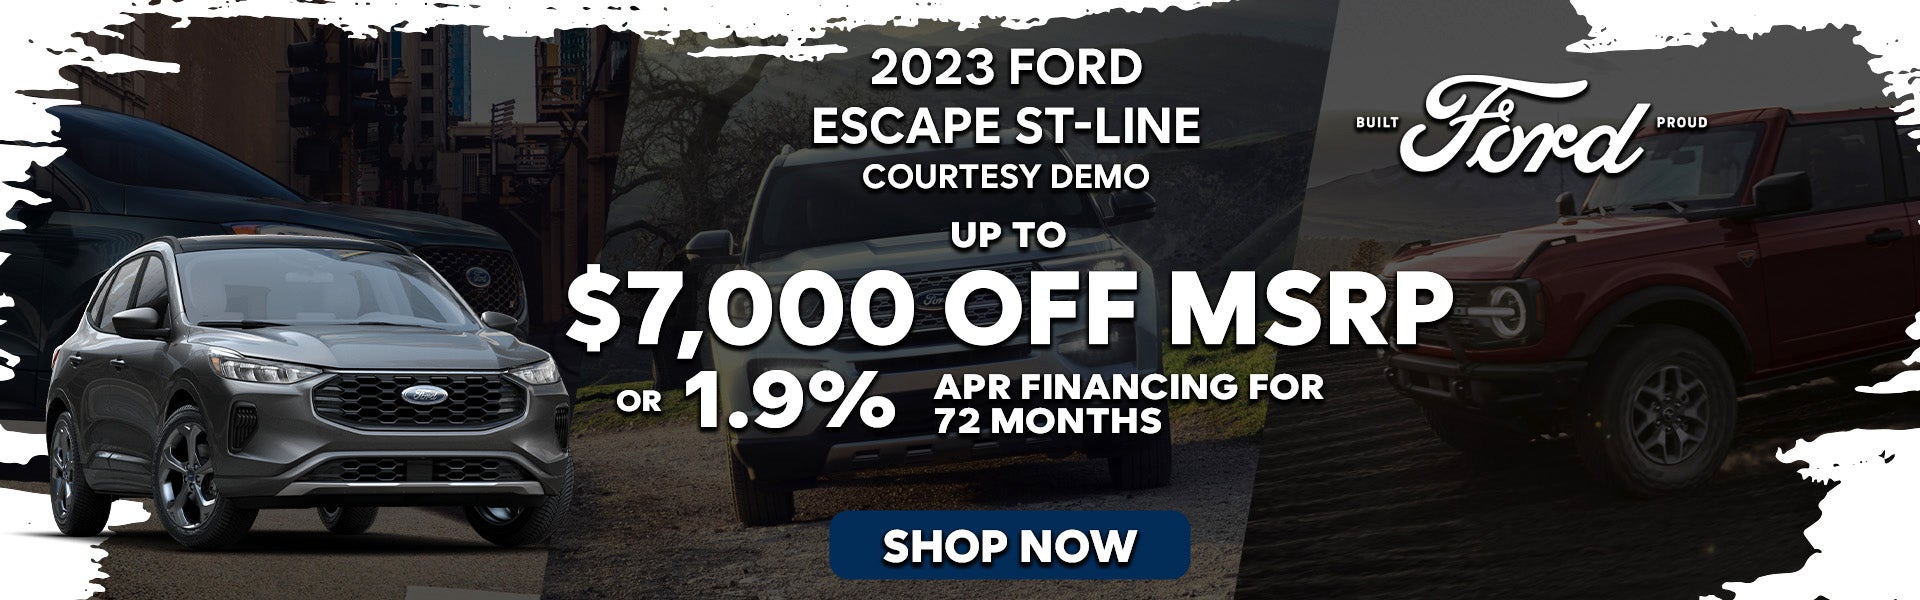 2023 Ford Escape ST-Line Courtesy Vehicle Special Offer